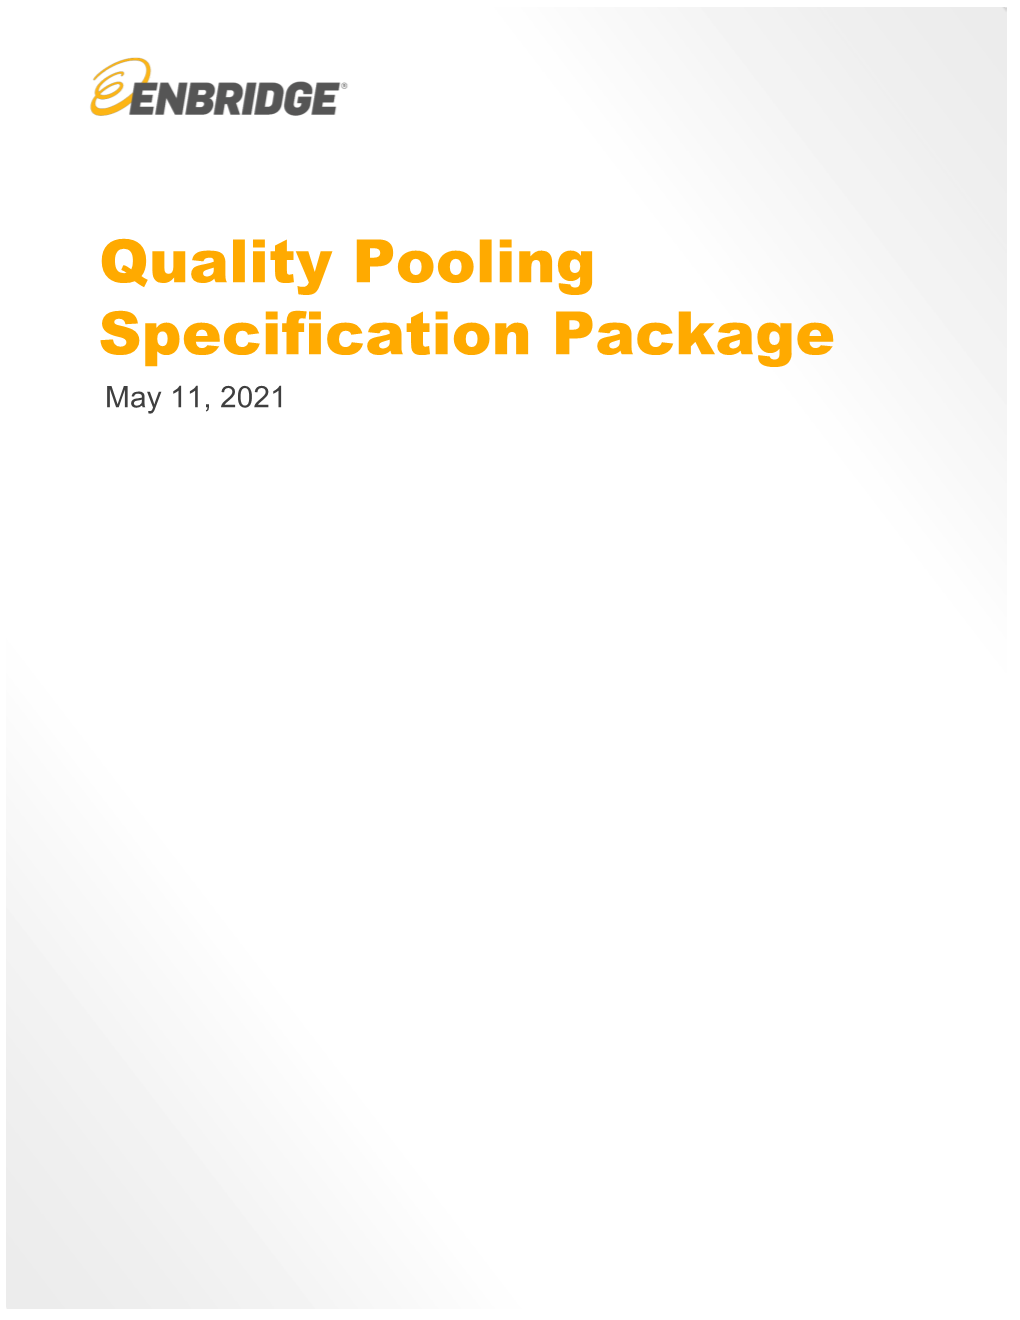 The Quality Pooling Specification Package